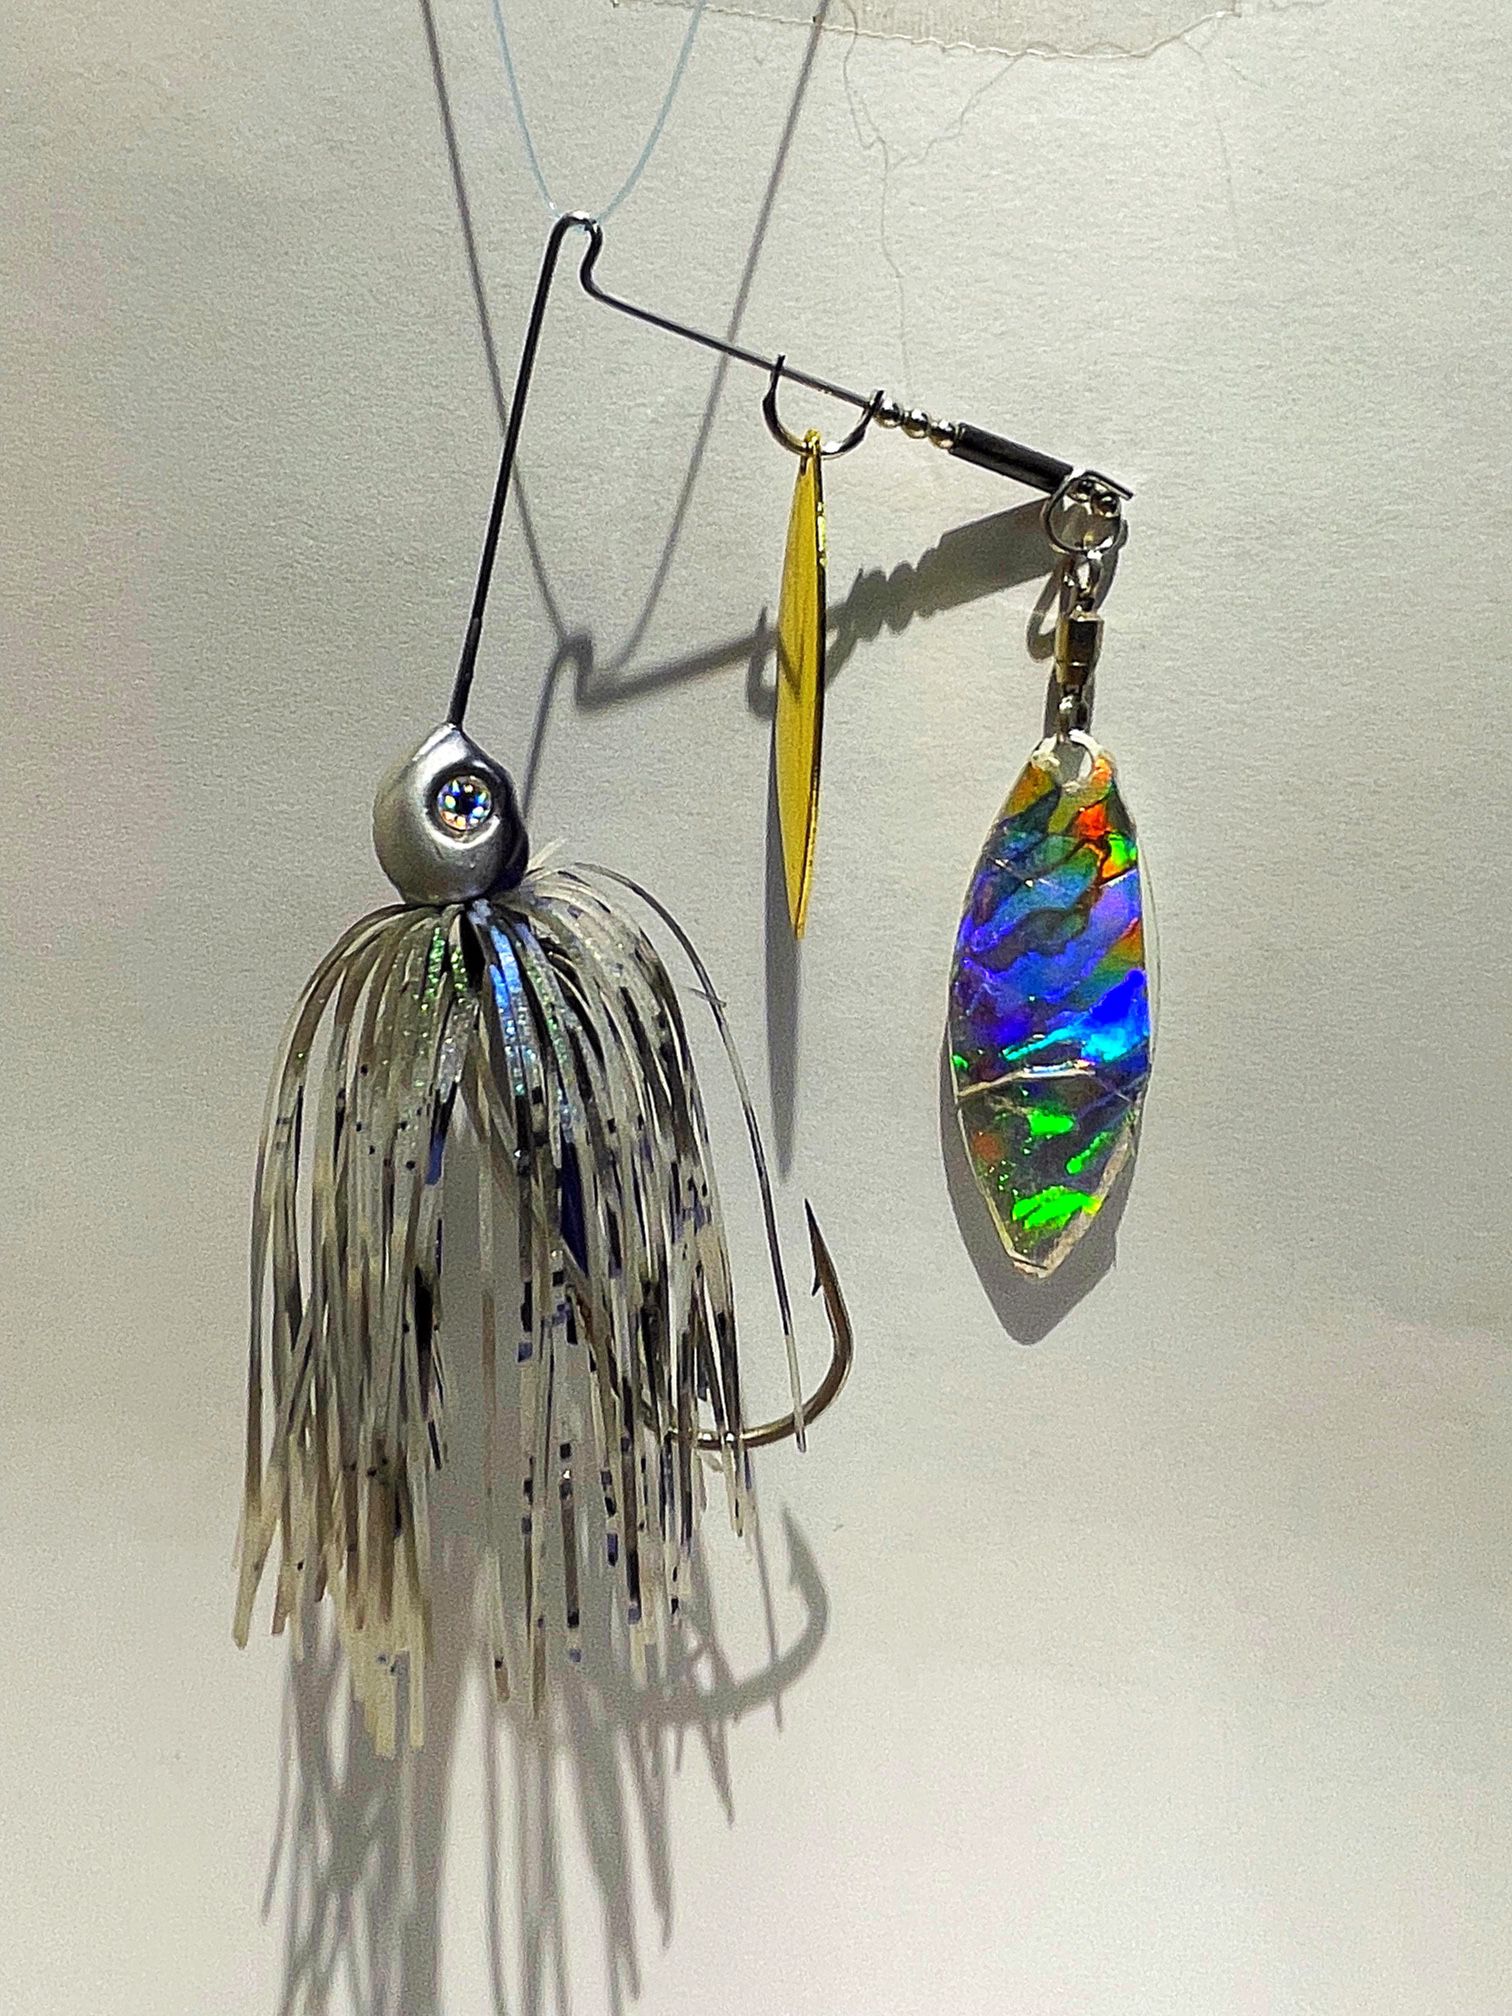 Bass Spinner Bait Lure Custom Made To Order for Sale in Middletown